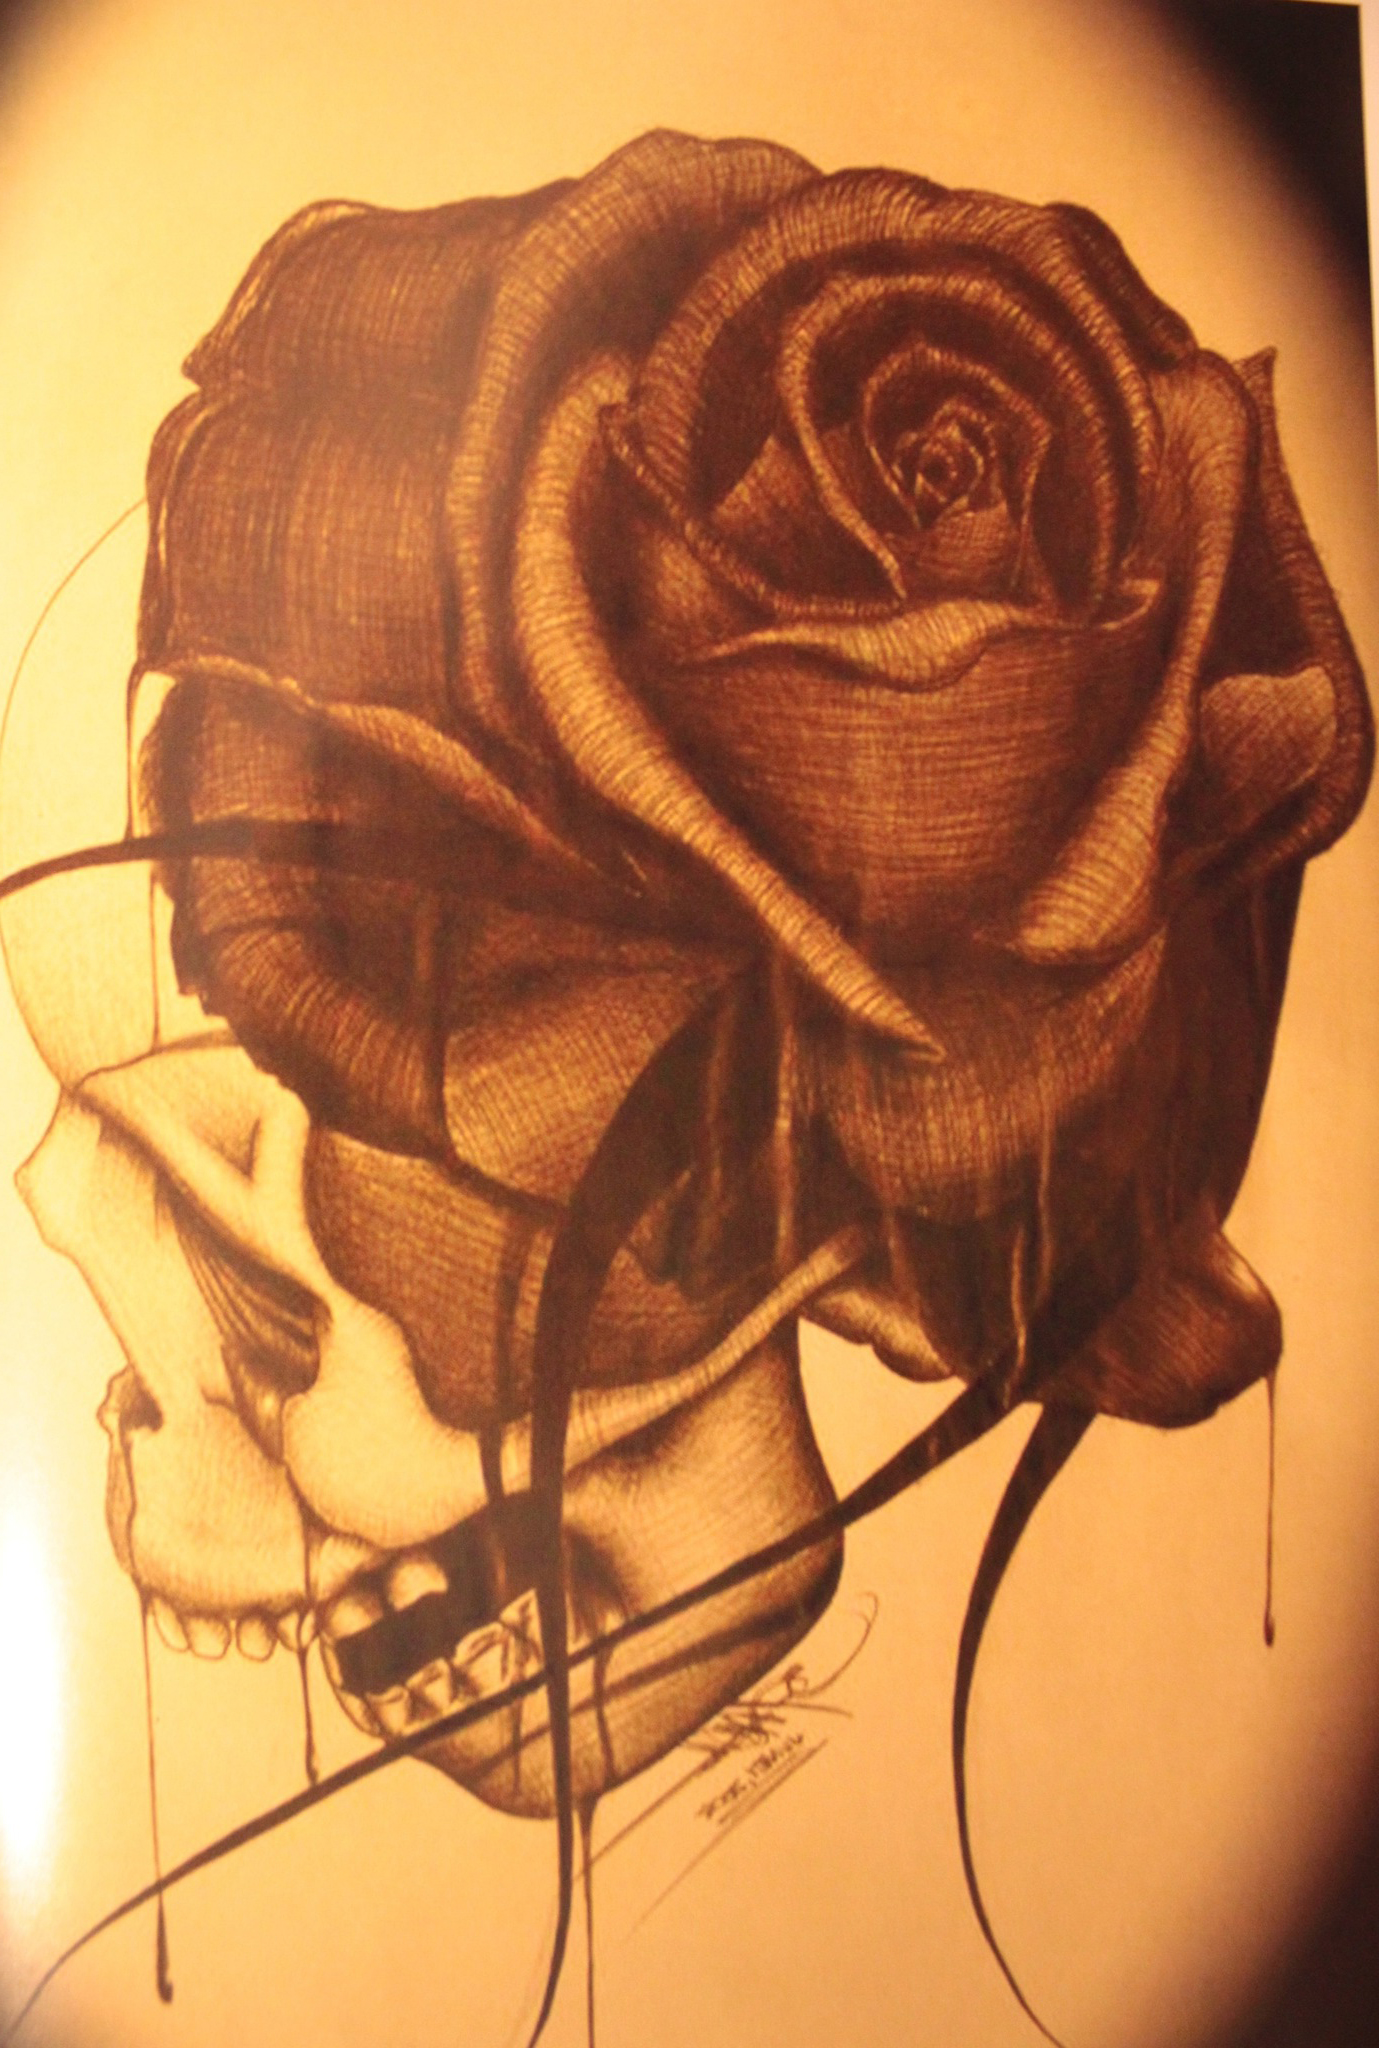 Scull illustration rose drawing tattoo